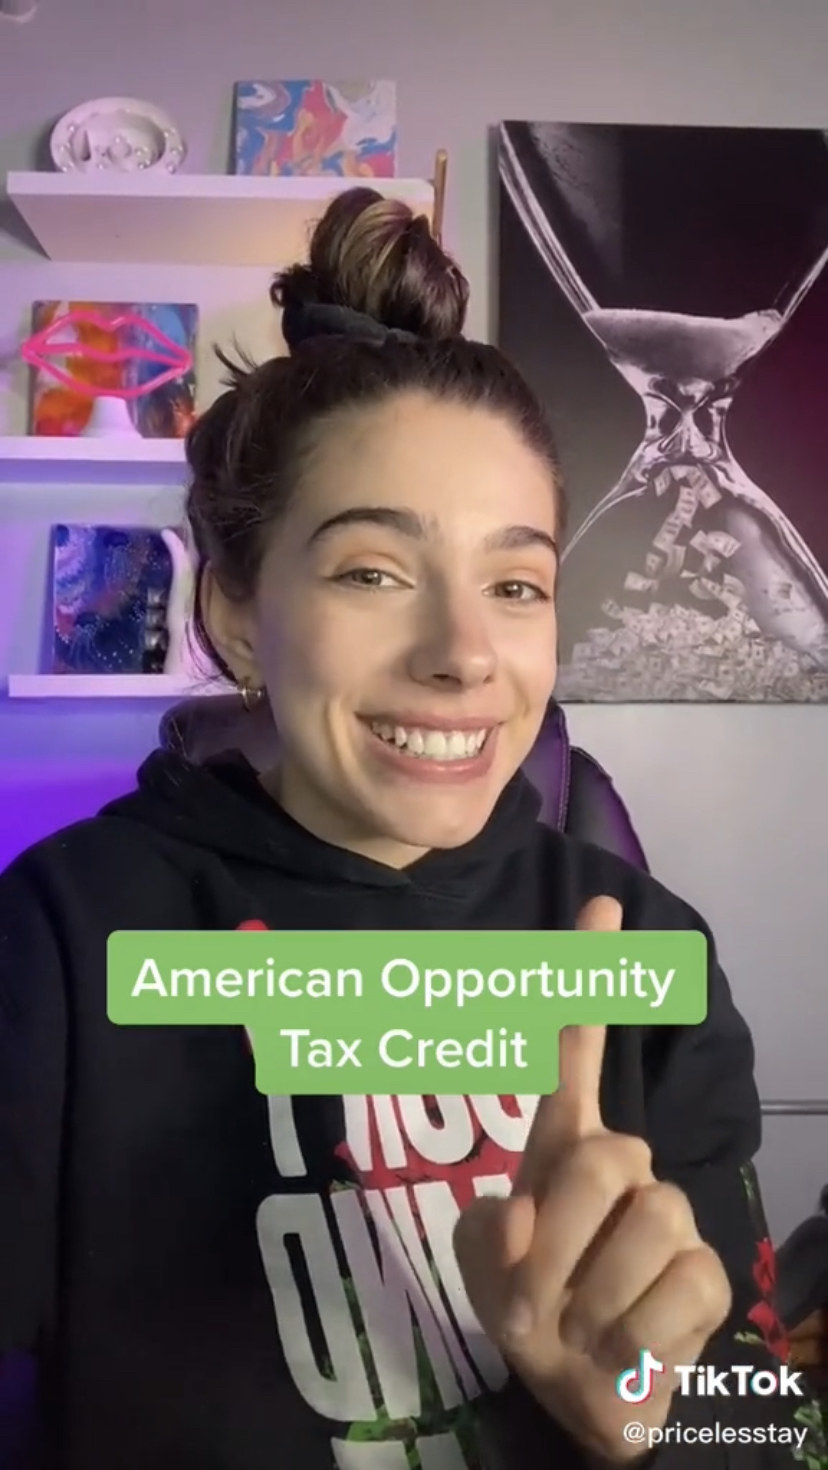 &quot;American Opportunity Tax Credit&quot;